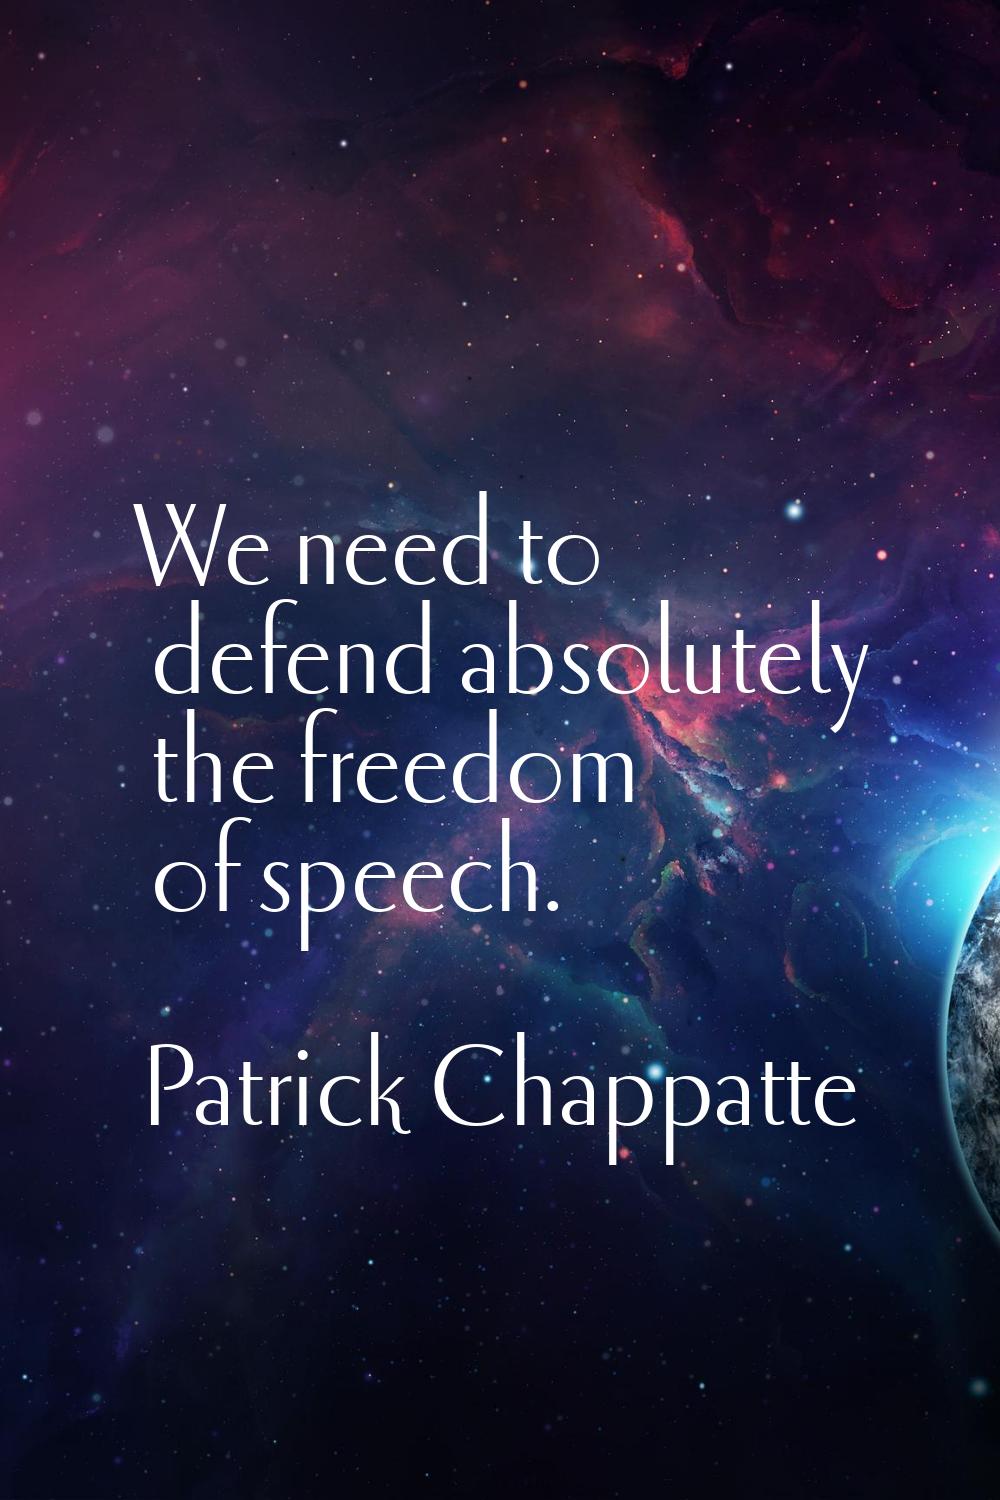 We need to defend absolutely the freedom of speech.